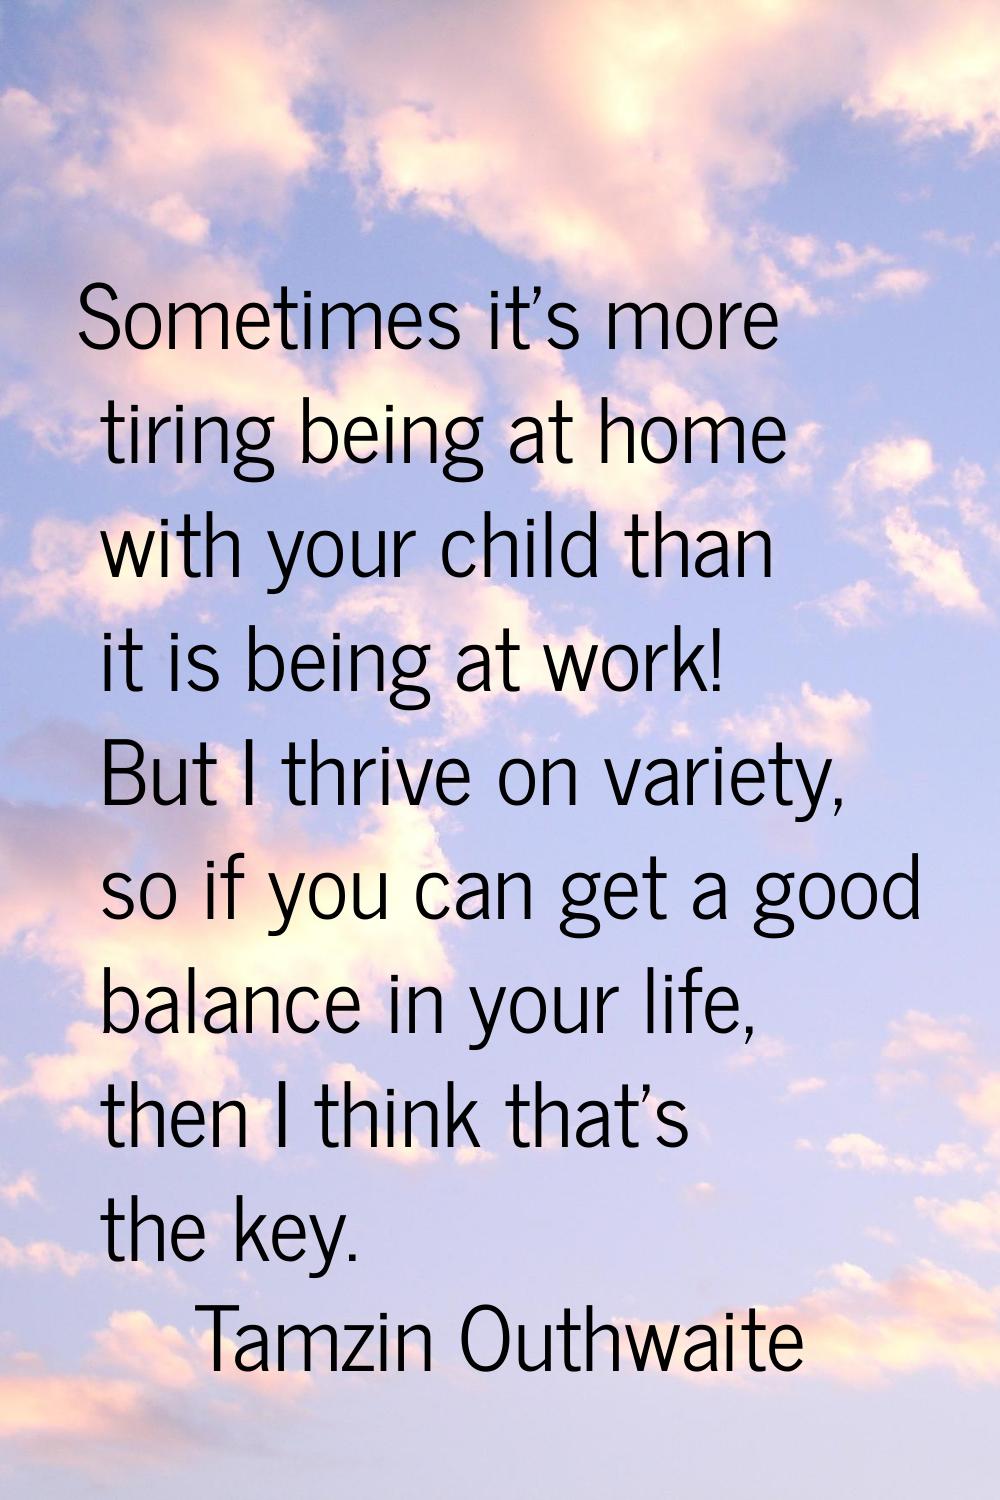 Sometimes it's more tiring being at home with your child than it is being at work! But I thrive on 